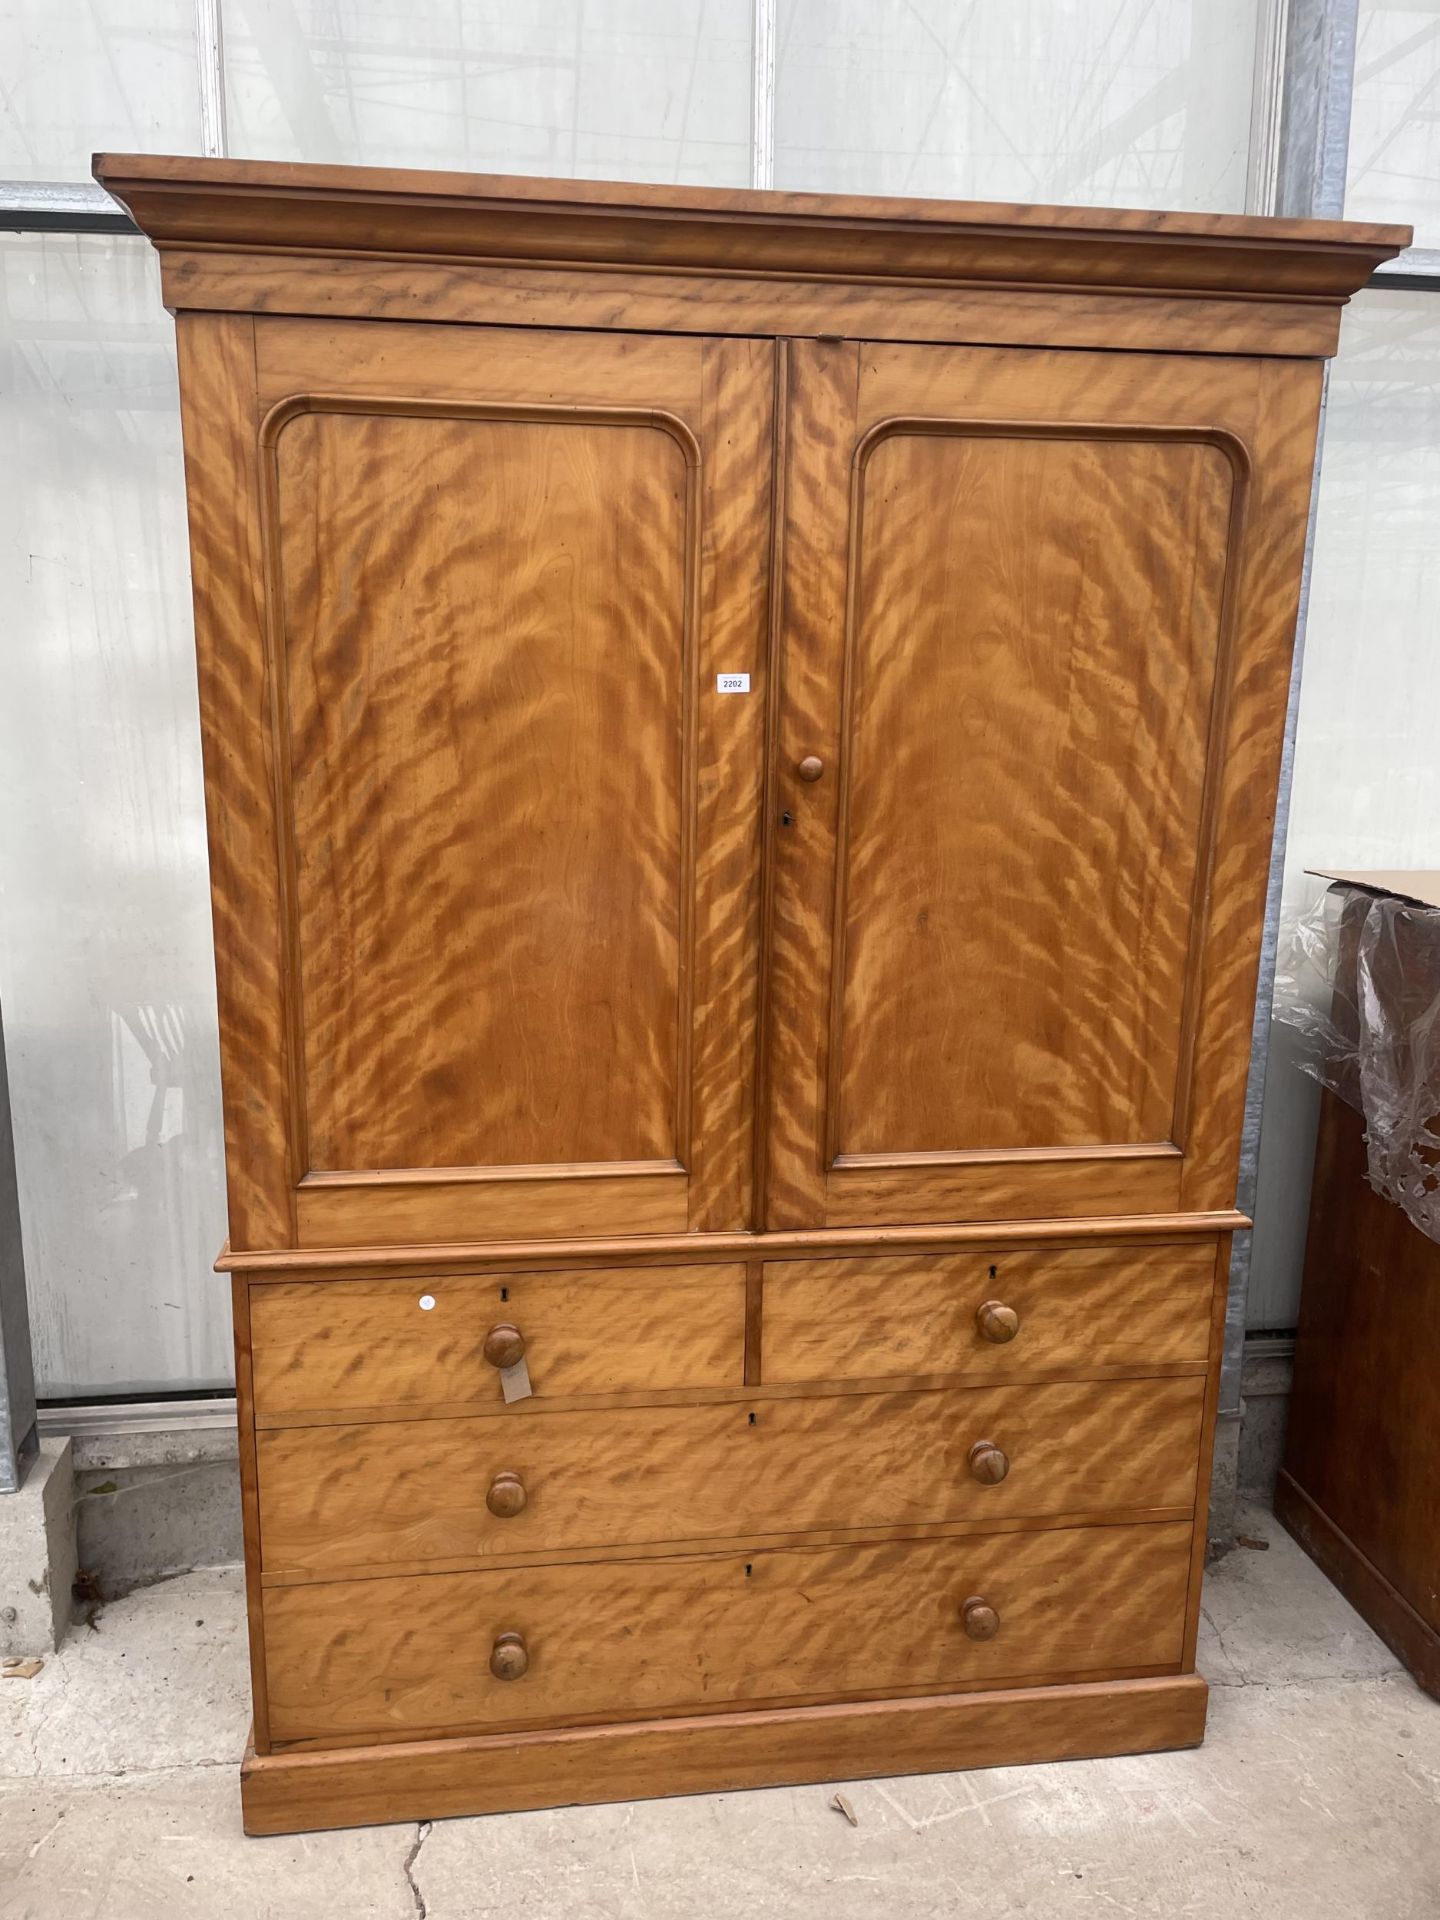 A VICTORIAN SATINWOOD HEAL & SON (LONDON) LINEN PRESS, THE TOP ENCLOSING FOUR SLIDES, THE BASE